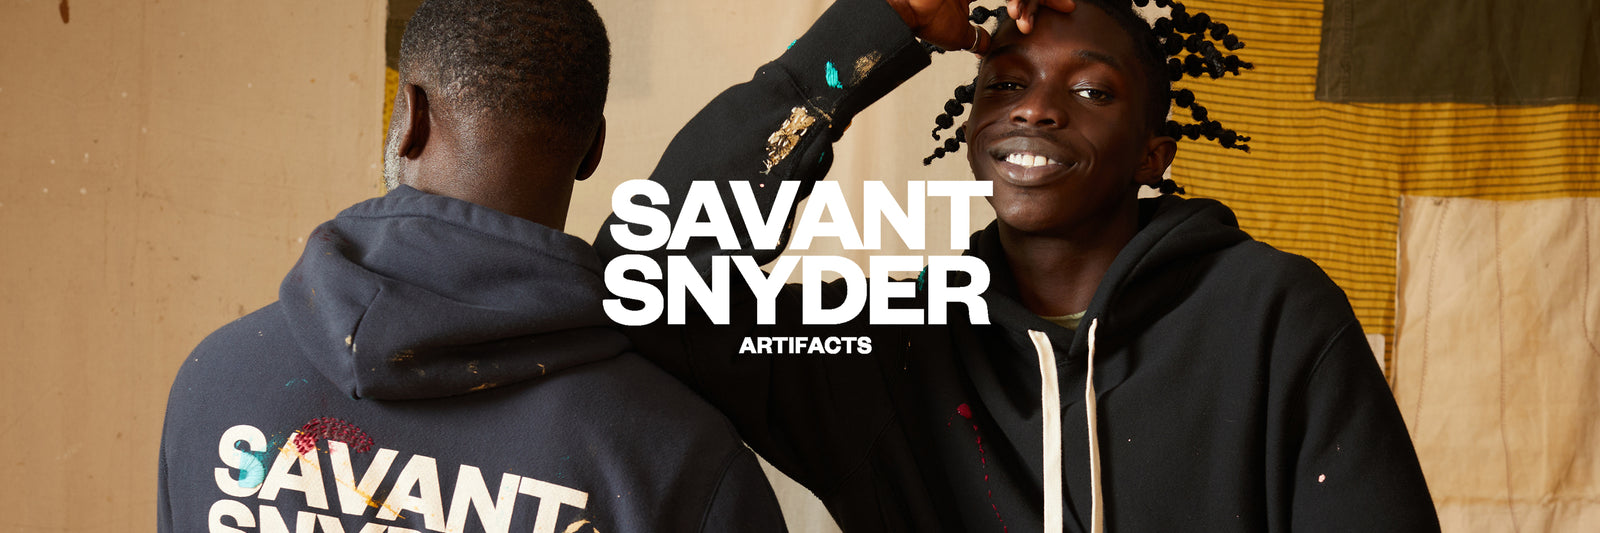 The New Todd Snyder x NBA Collection Is Truly Baller